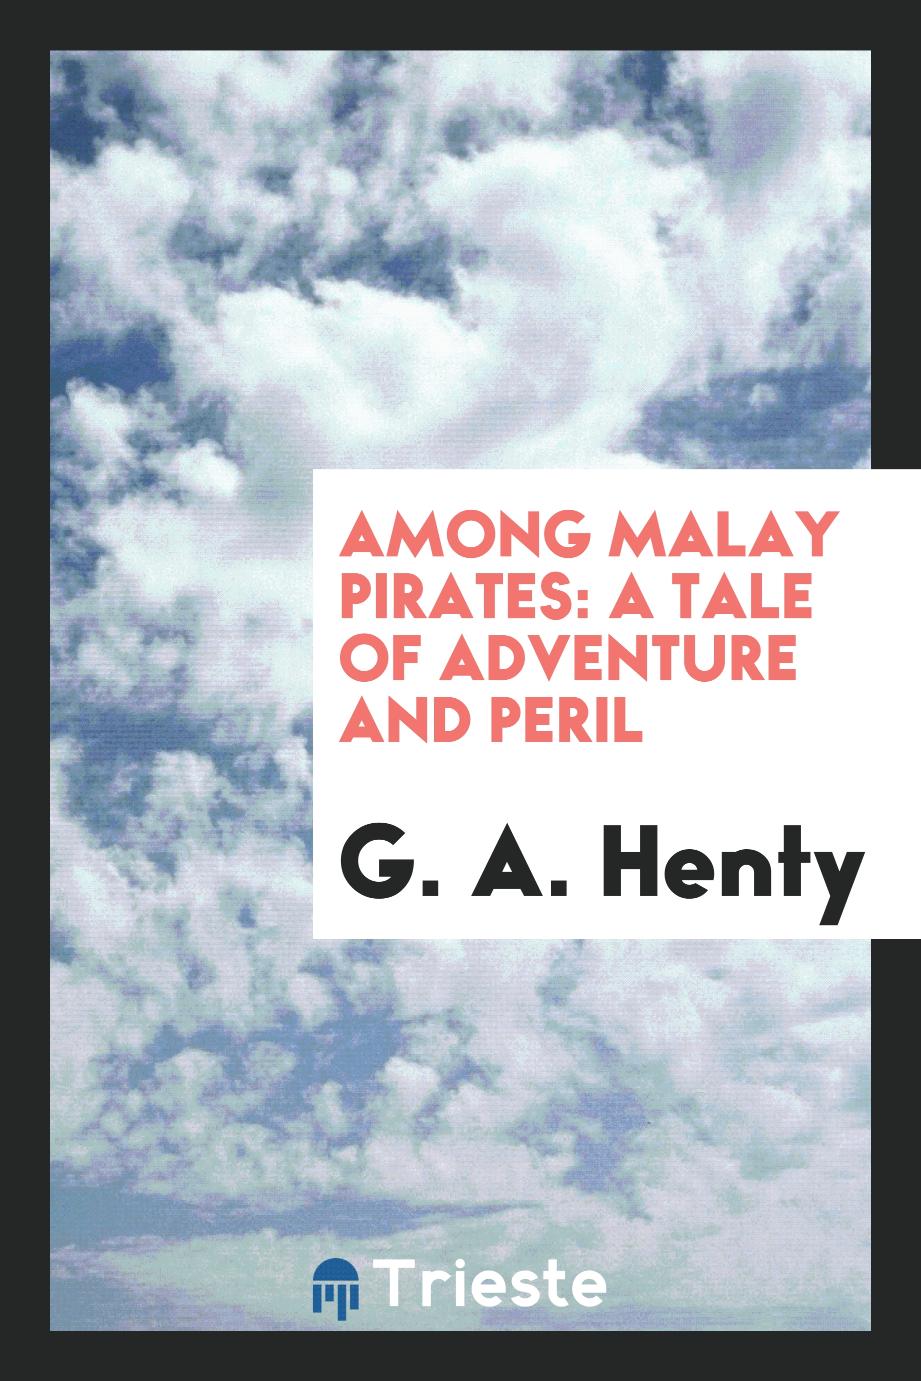 Among Malay pirates: a tale of adventure and peril